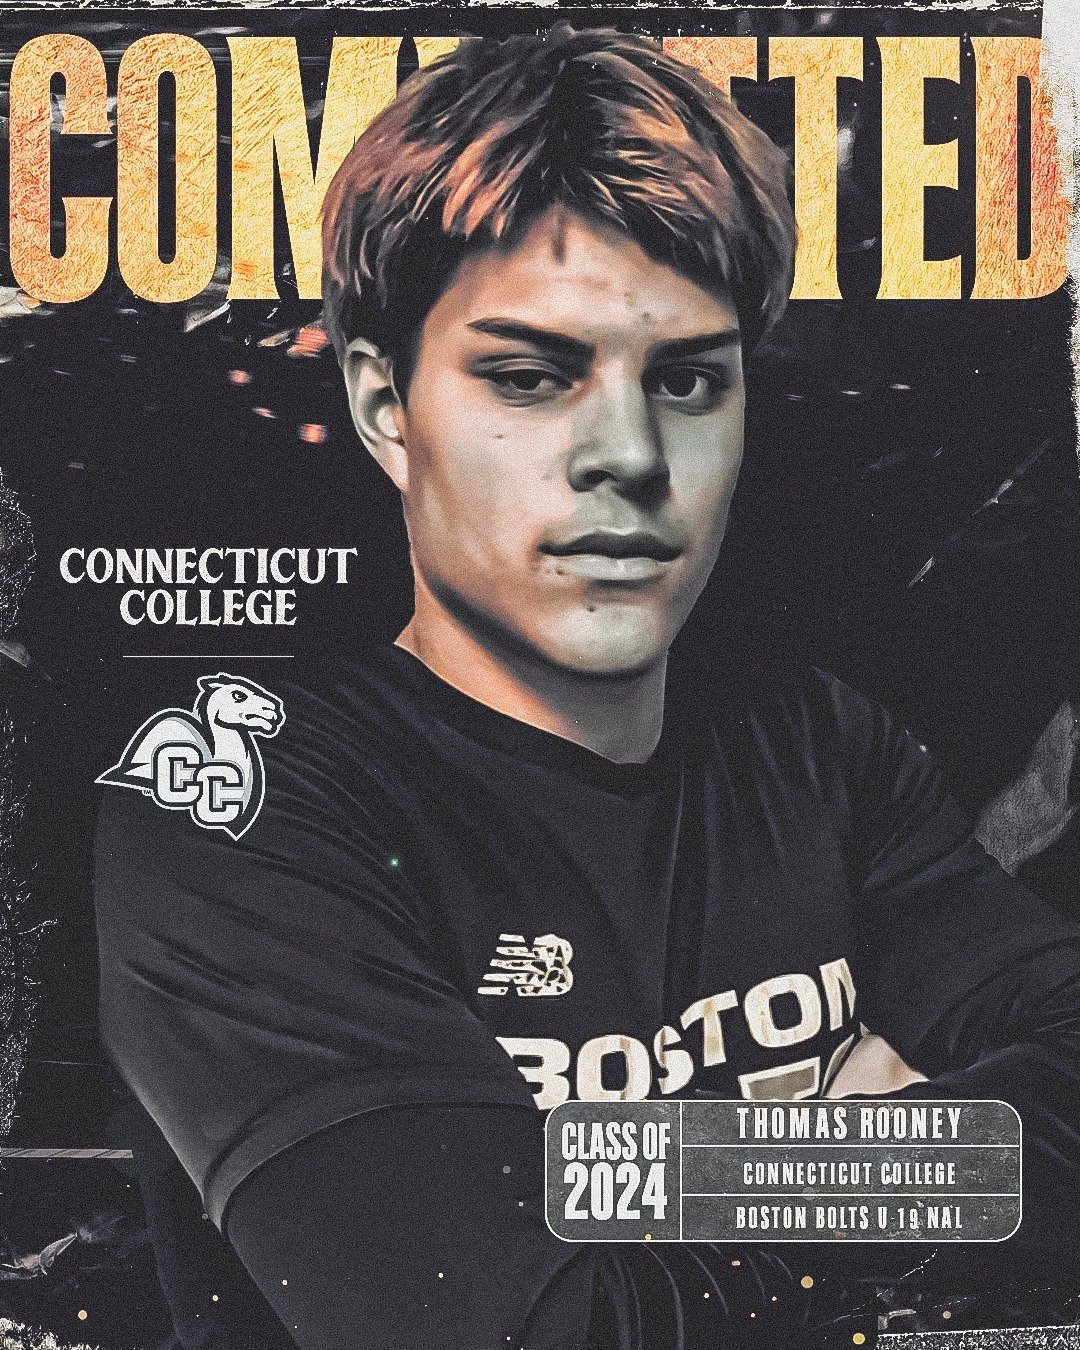 Special shoutout for Thomas Rooney on his commitment to play at Connecticut College next season! ⚡⚽️

Thomas has been holding down the backline and leading our National Academy League team for years! Couldn't be more excited to watch him take the pit